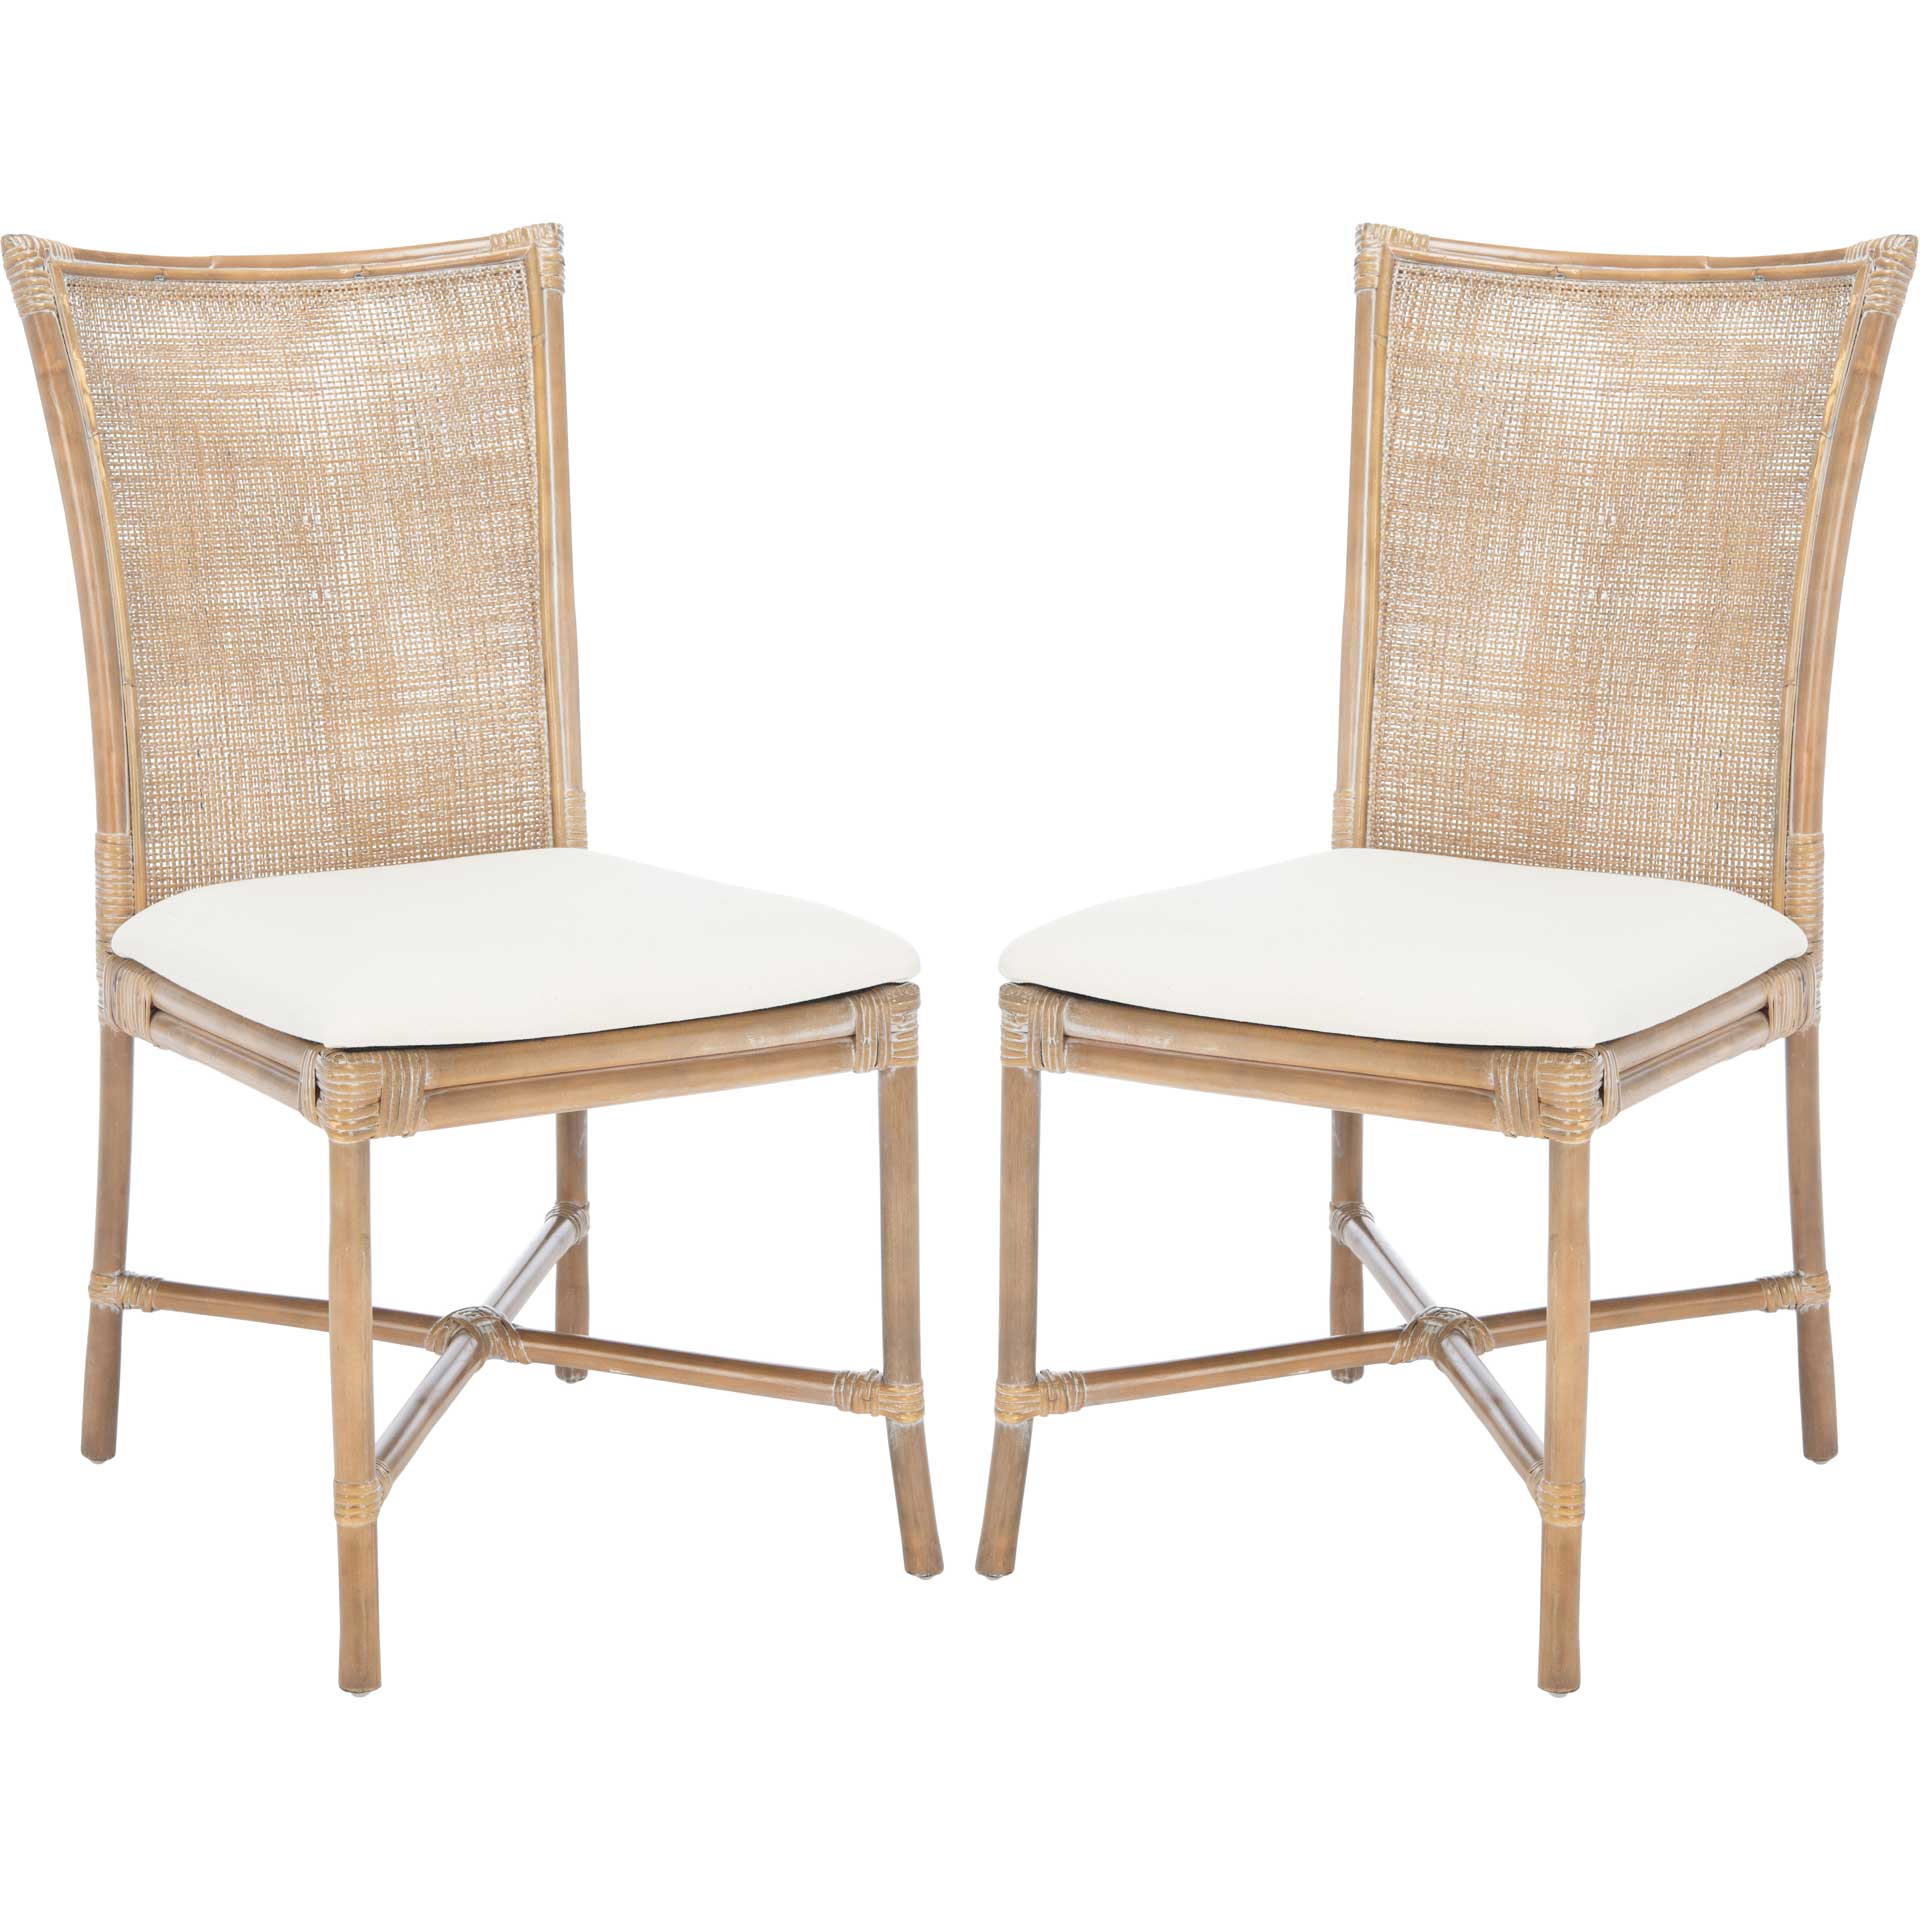 Charlee Rattan Accent Chair Gray White Wash (Set of 2)